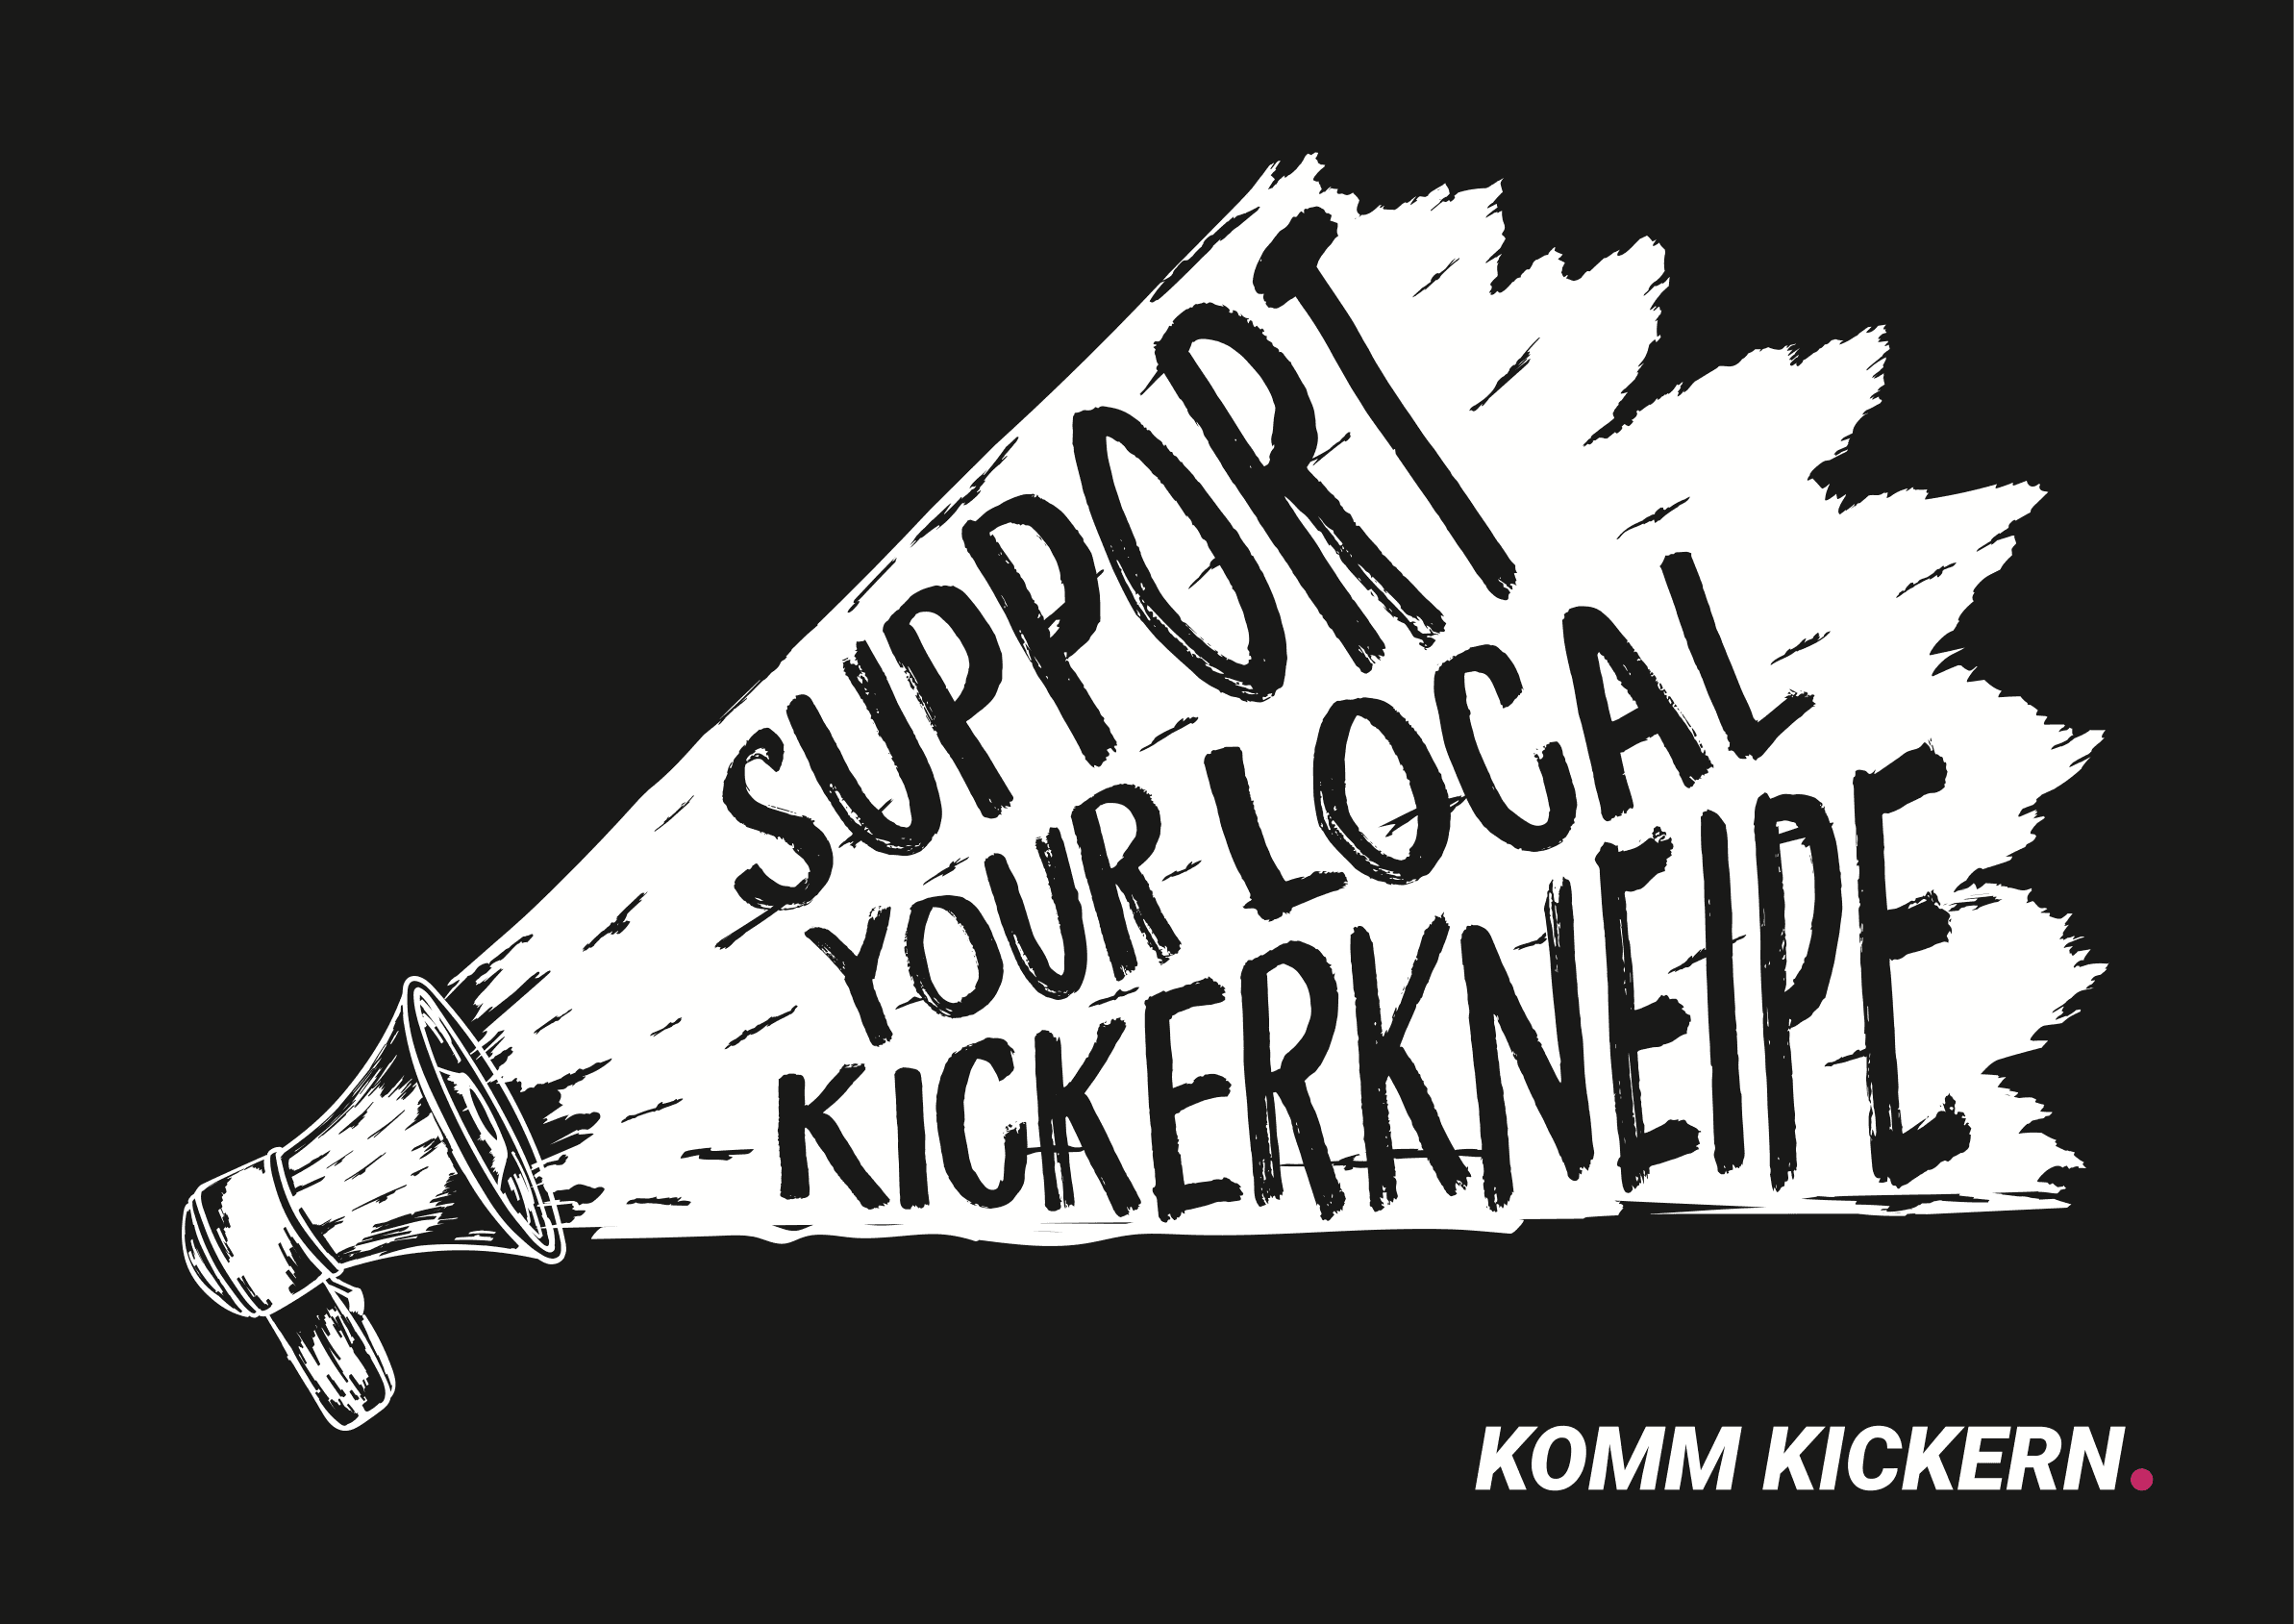 Support your local Kickerkneipe